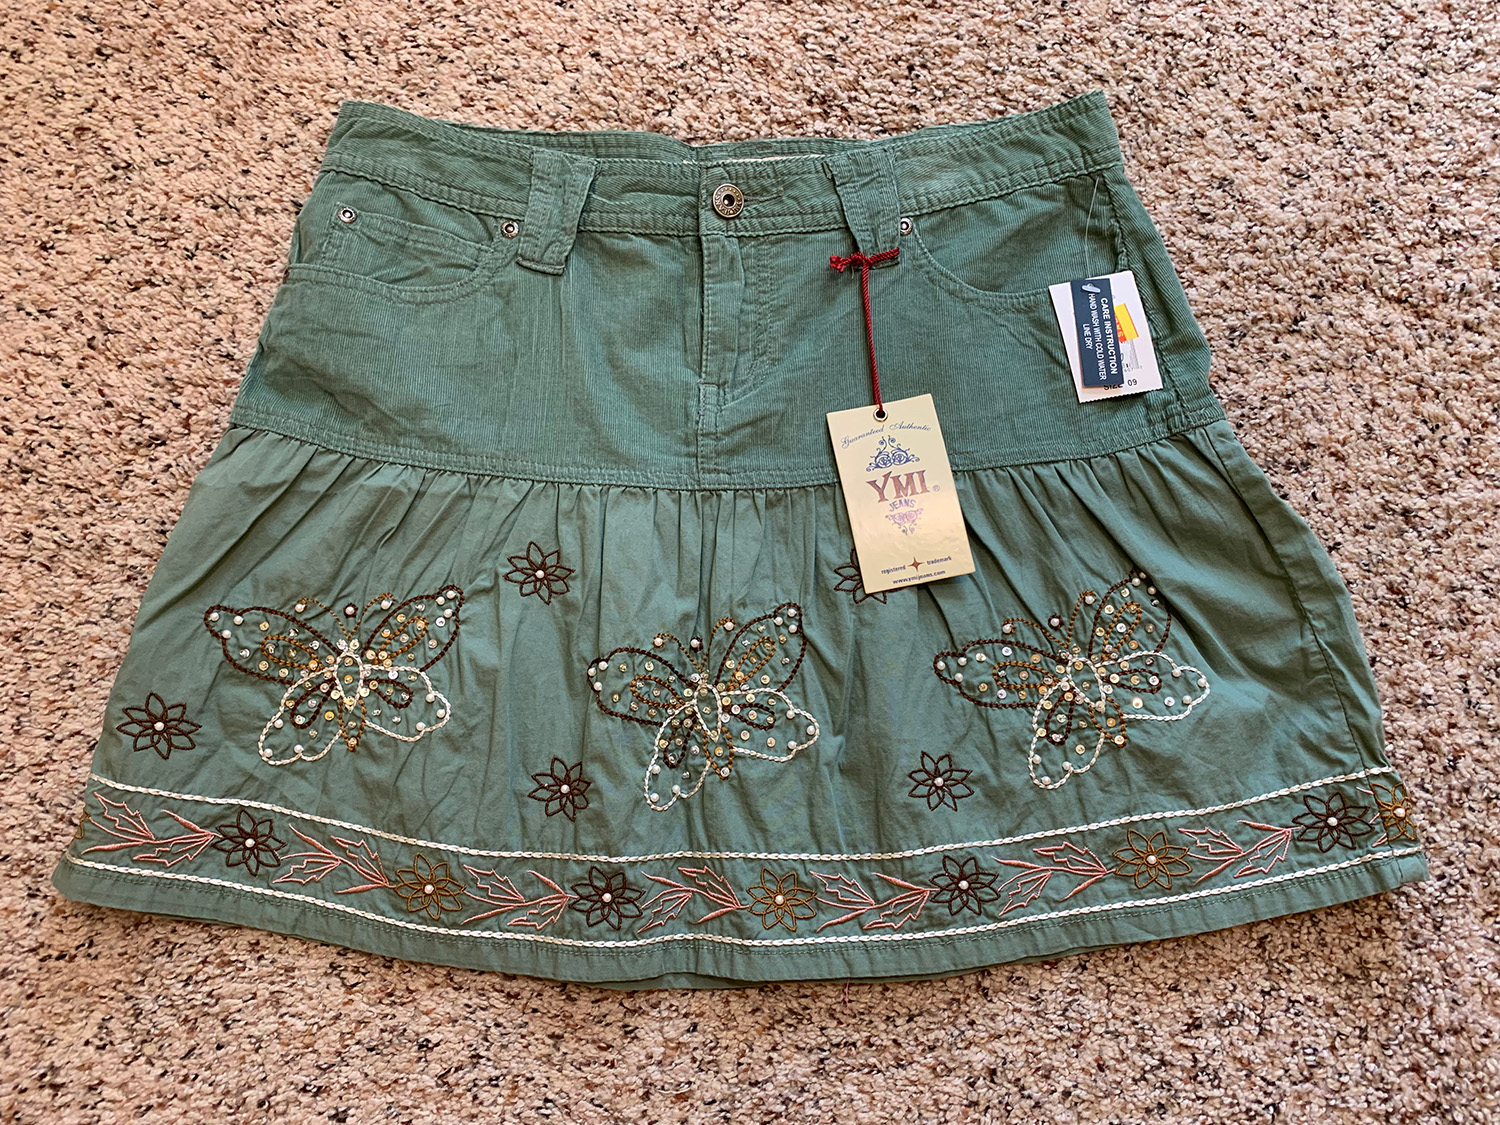 YMI Womens Corduroy Cotton Skirt New with Tags NWT Size 9